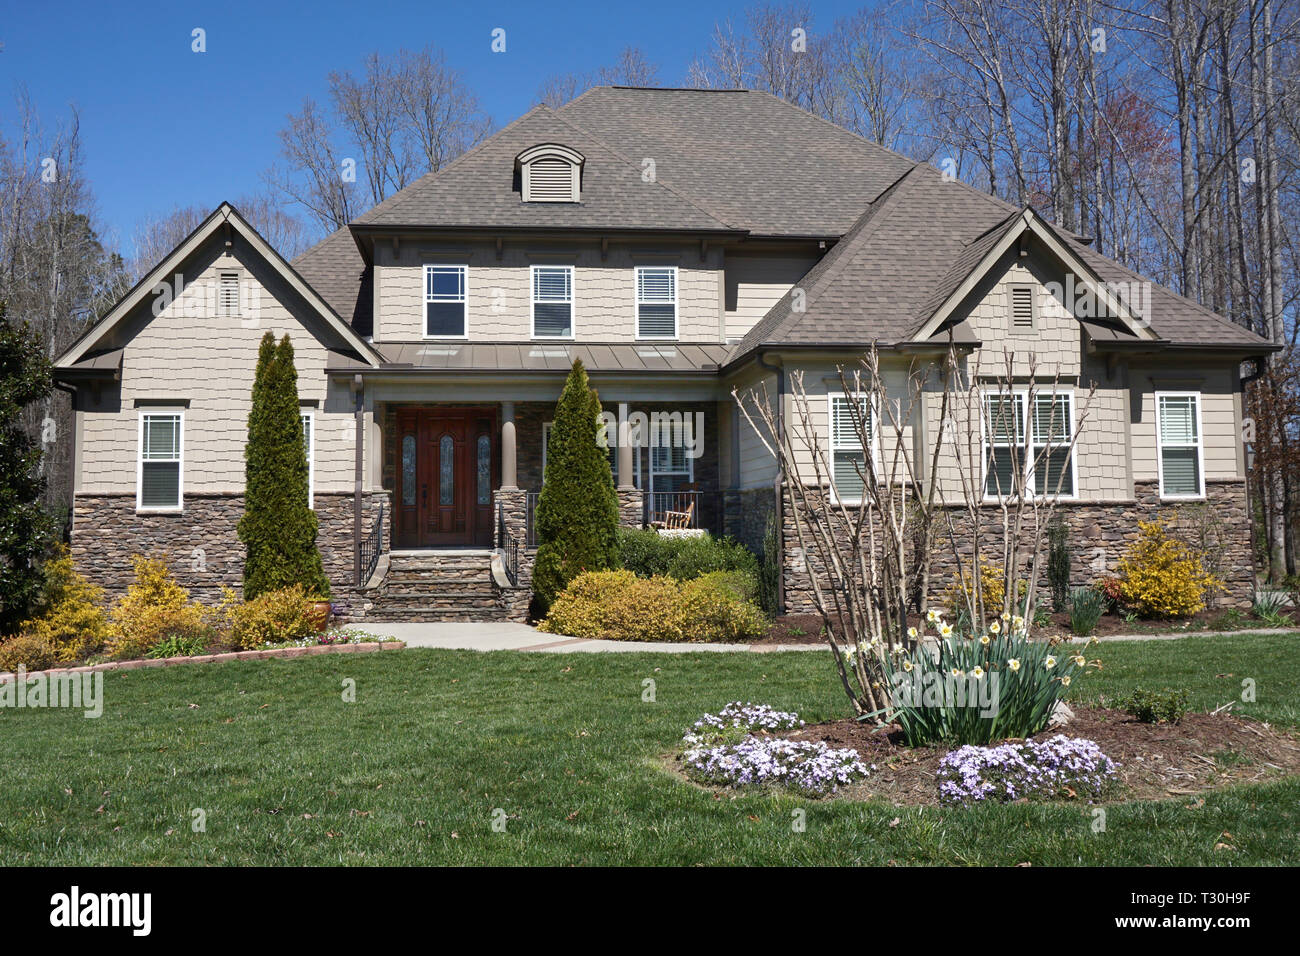 Stone and siding two-story home with flowers in the yard Stock Photo